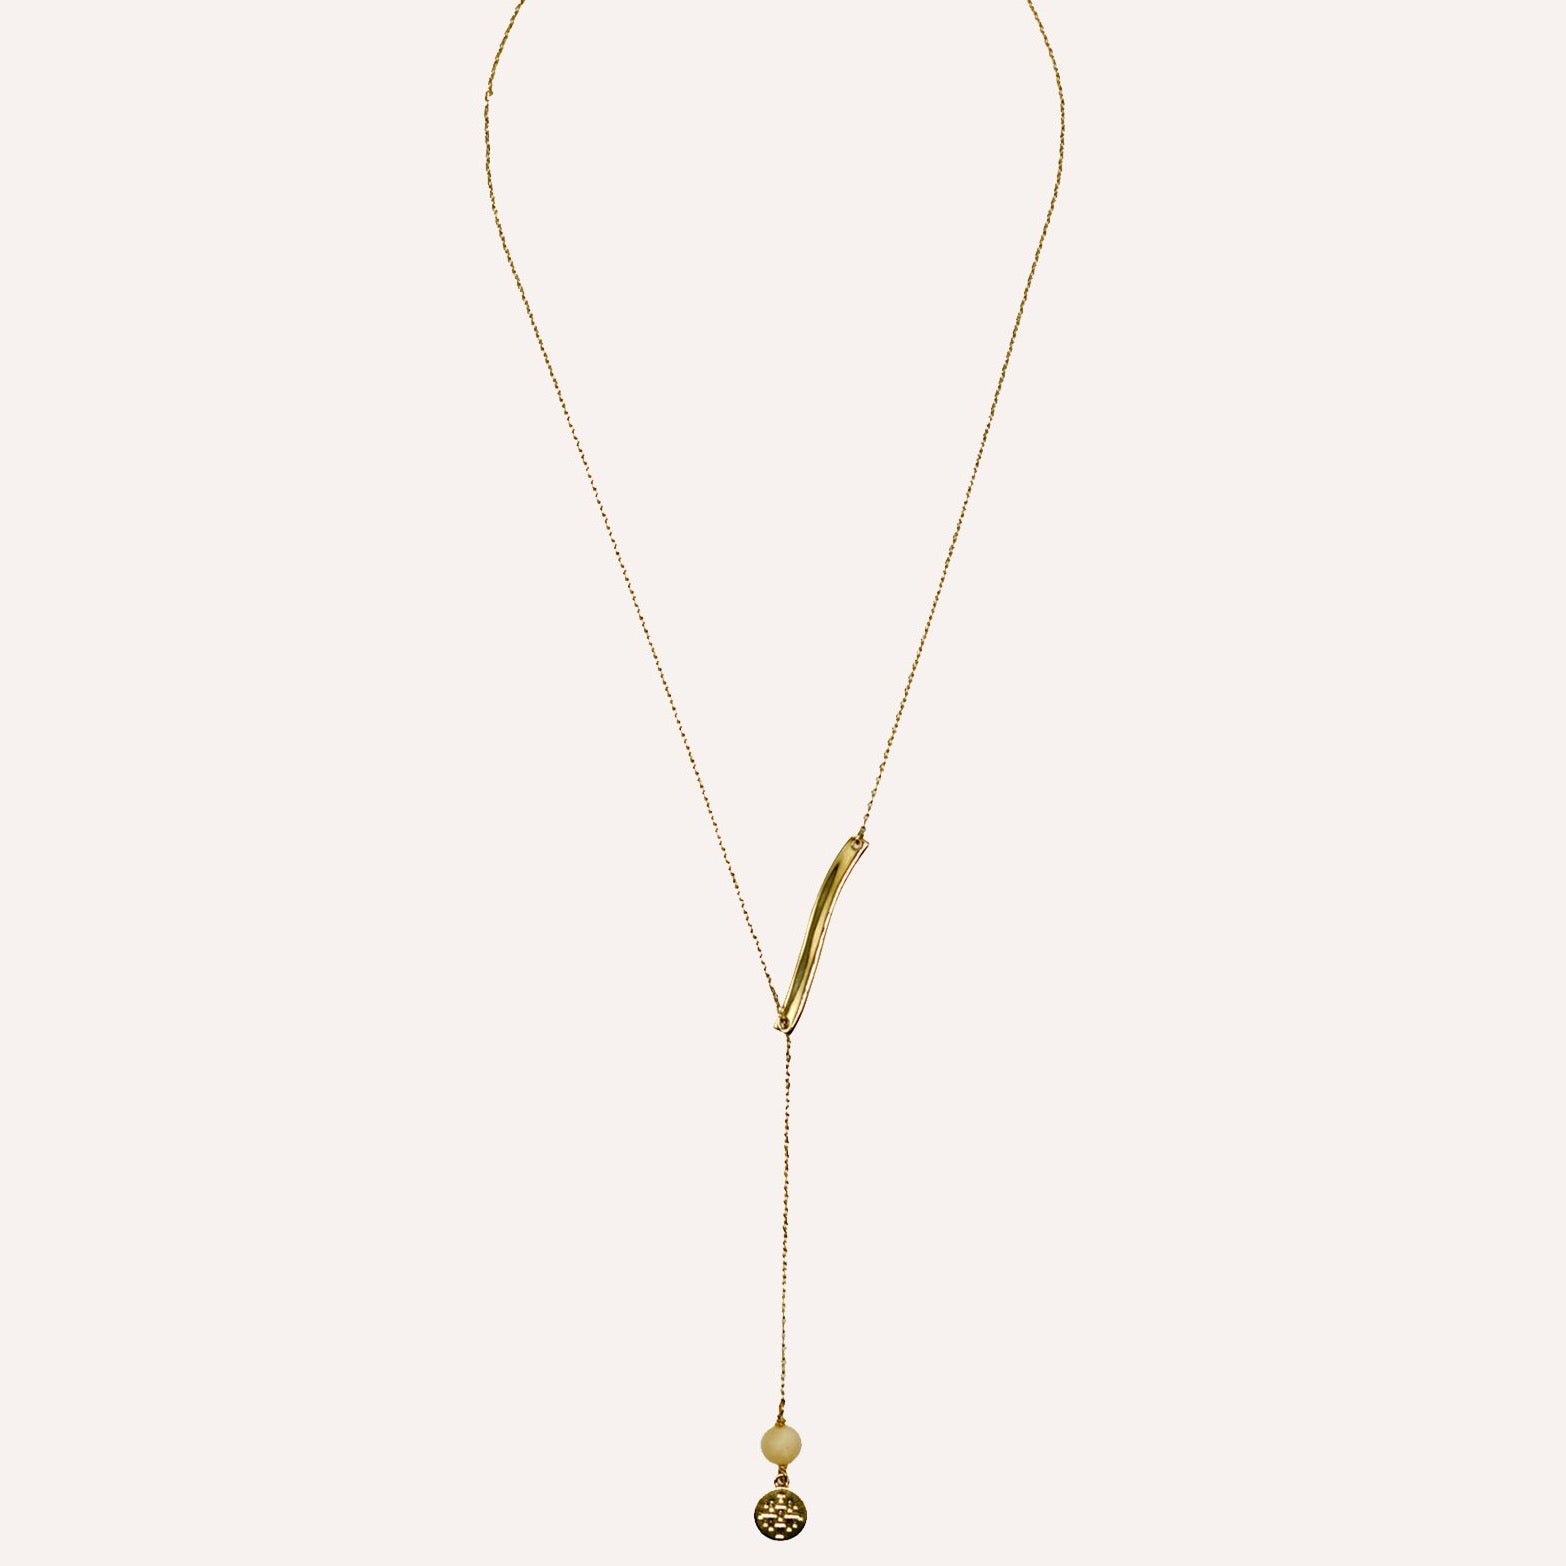 FEARLESS Inspirational Chain Lariat Necklace with Horn